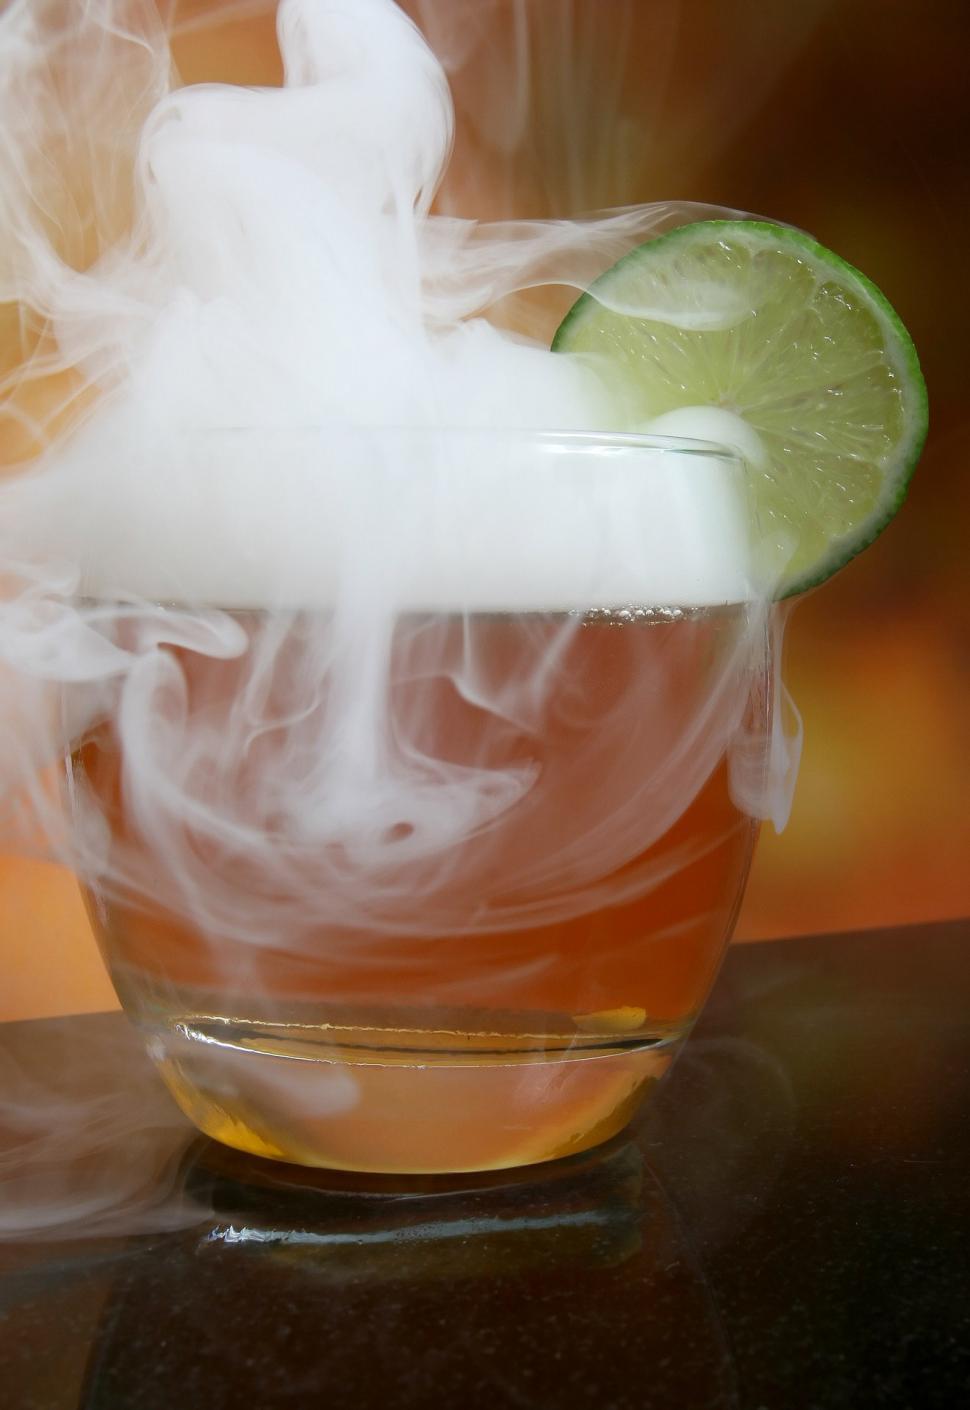 Free Image of Refreshing Cup of Lime-Infused Liquid 